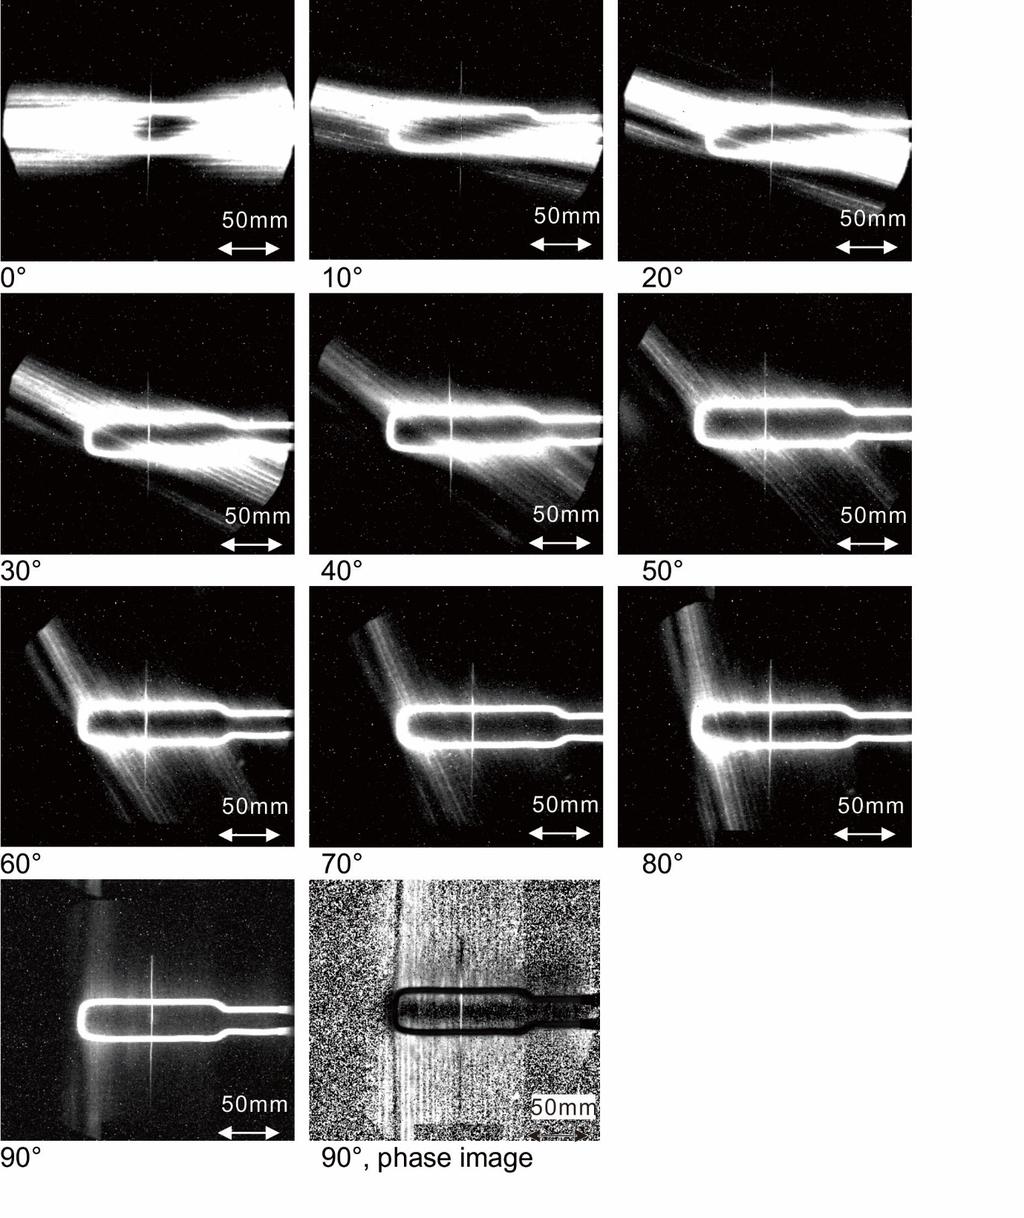 Fig. 3. Thermographic amplitude images of the uni-axial sample for various rotation angles β. For β=90, a phase image is shown in addition.